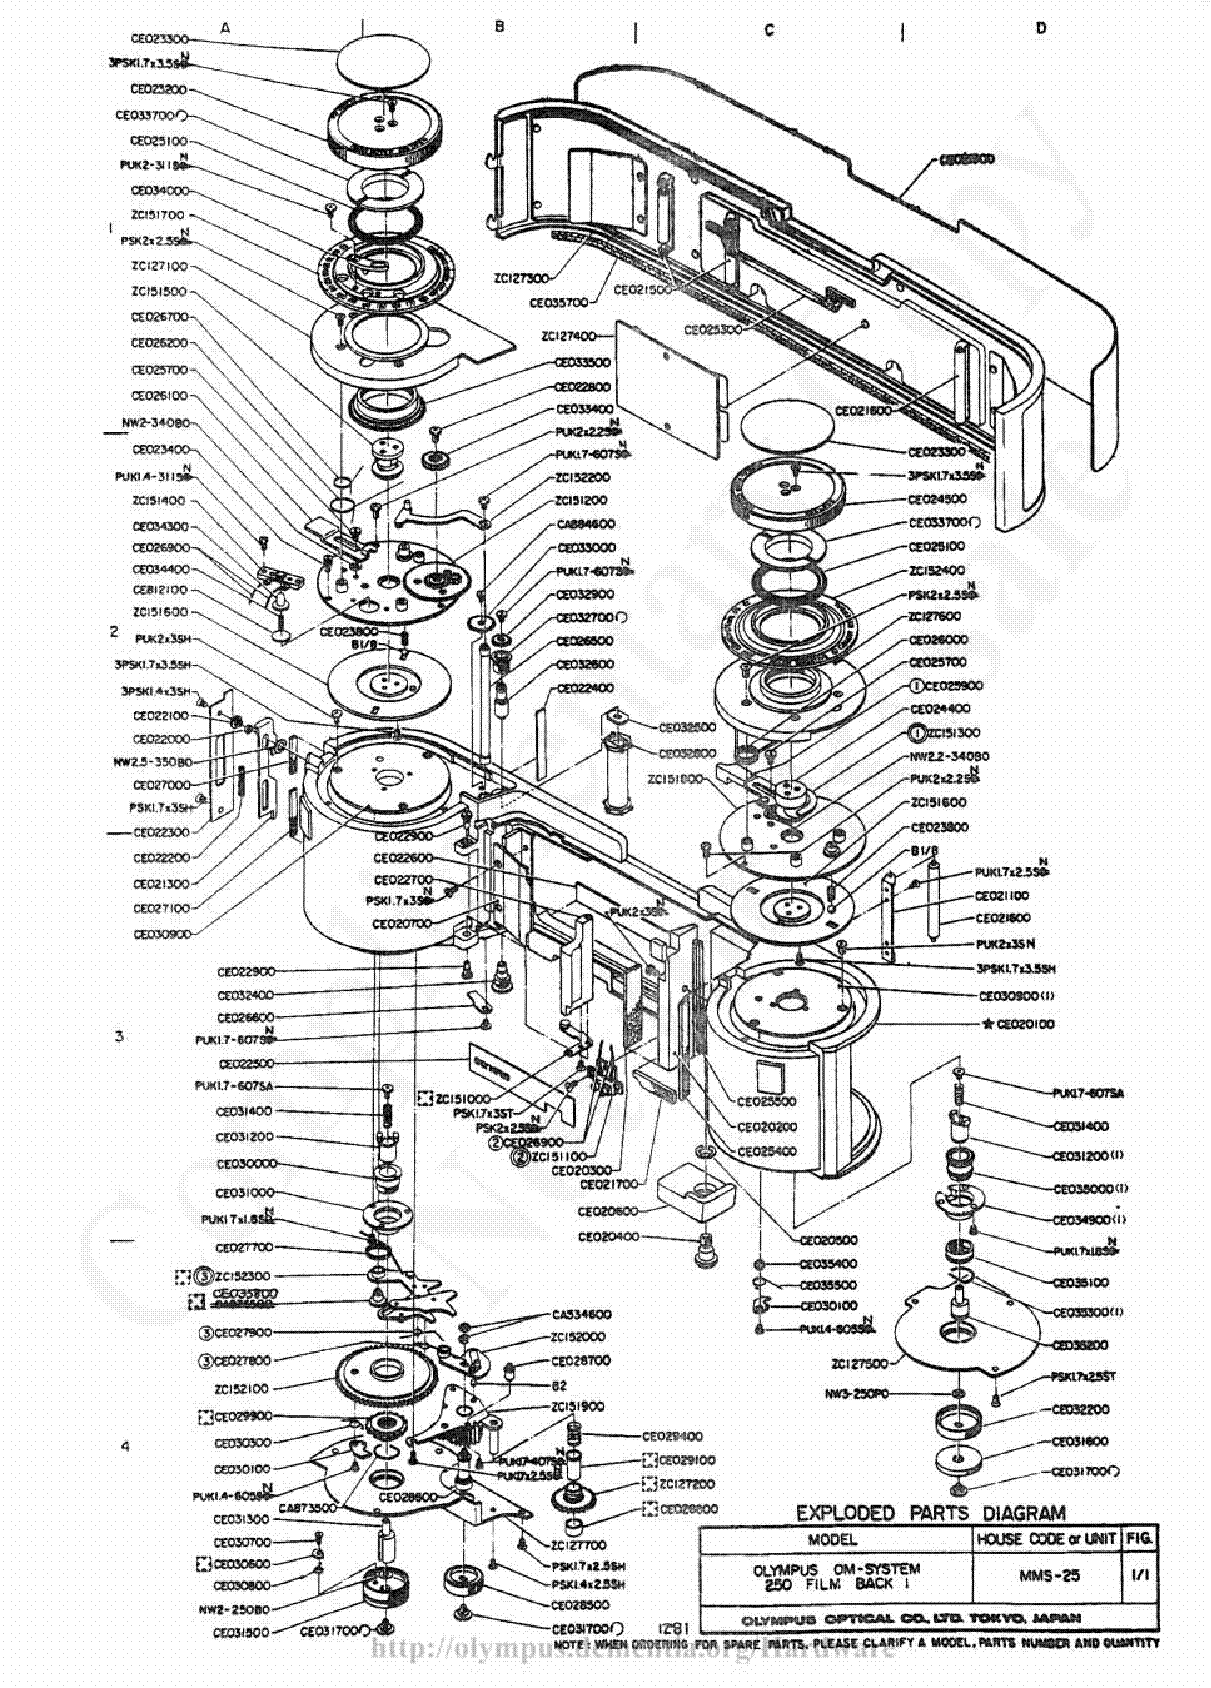 Olympus 250filmback Exploded Parts Diagram Service Manual